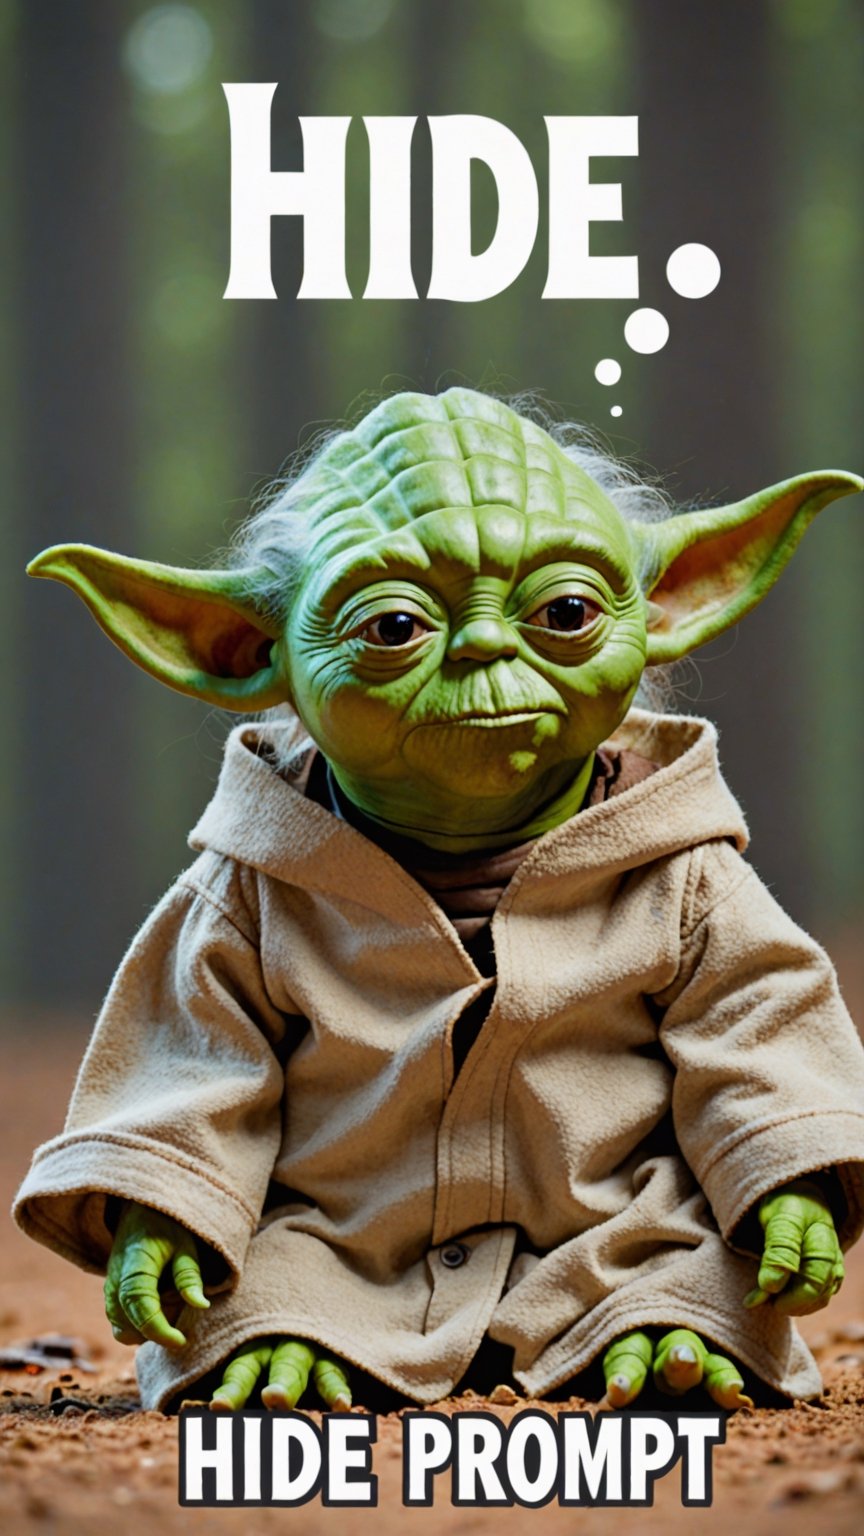 Photo of Yoda with text bubble that says "hide prompt" 